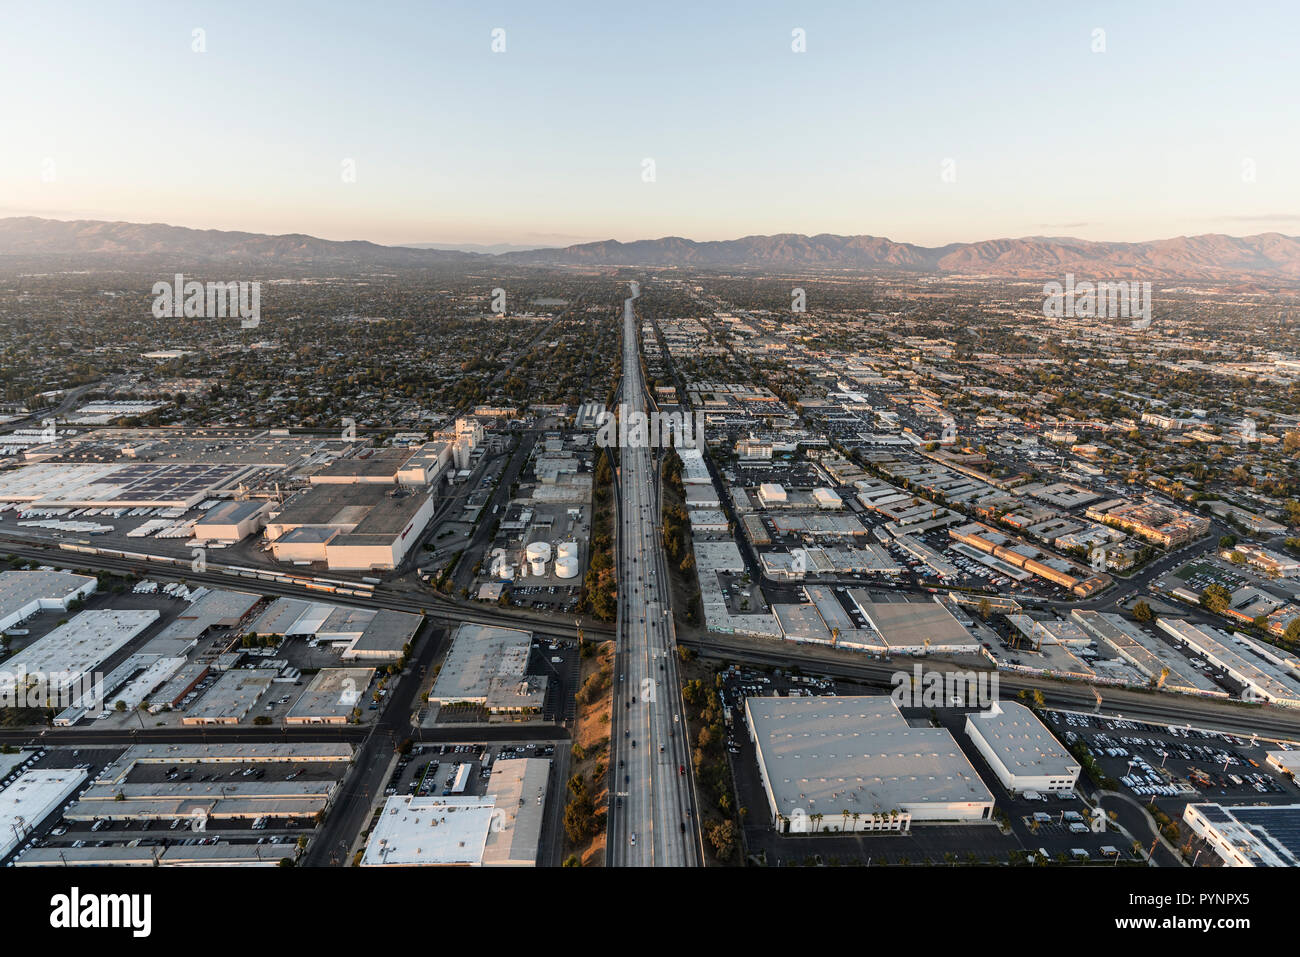 Los Angeles, California, USA - October 21, 2018:  Aerial view industrial buildings and the 405 freeway near Roscoe Blvd in the San Fernando Valley are Stock Photo